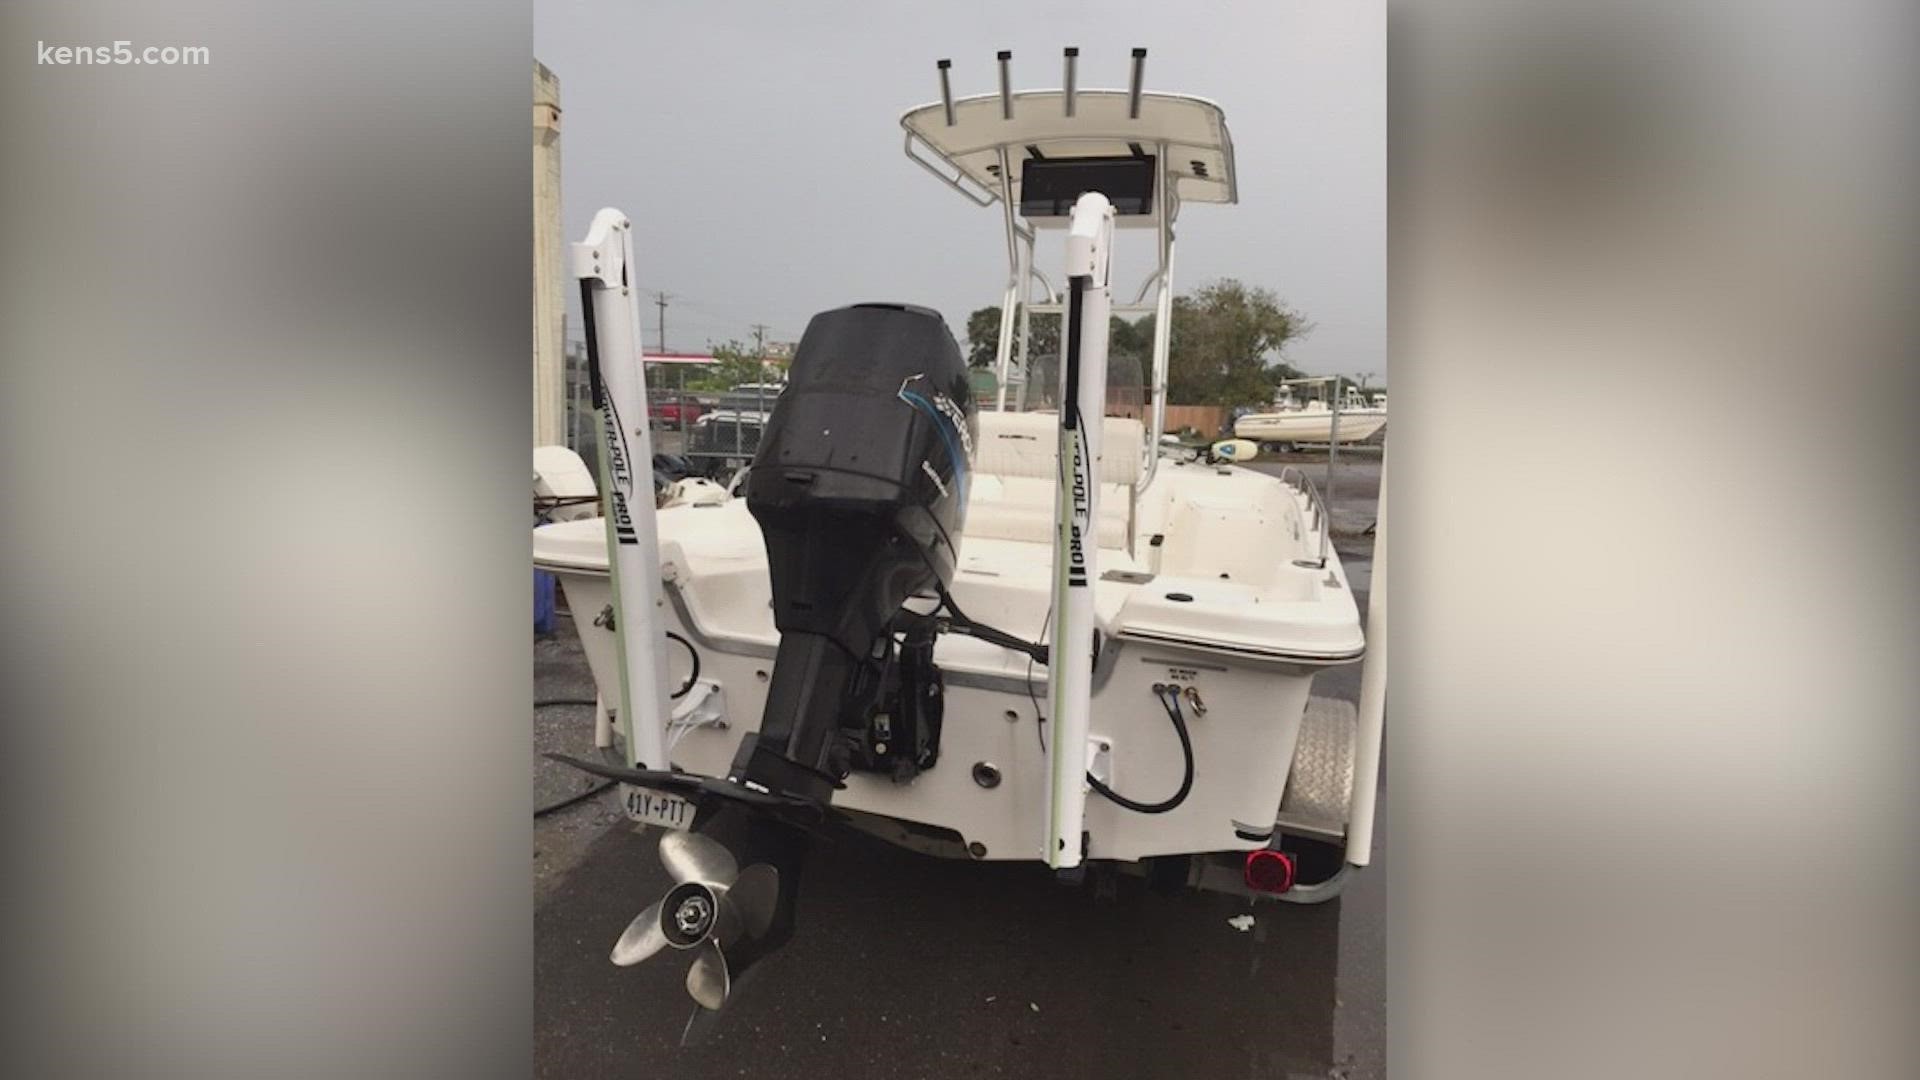 A private citizen donated a 2005 Sea Fox boat to the sheriff's office, quietly ending a dramatic saga.